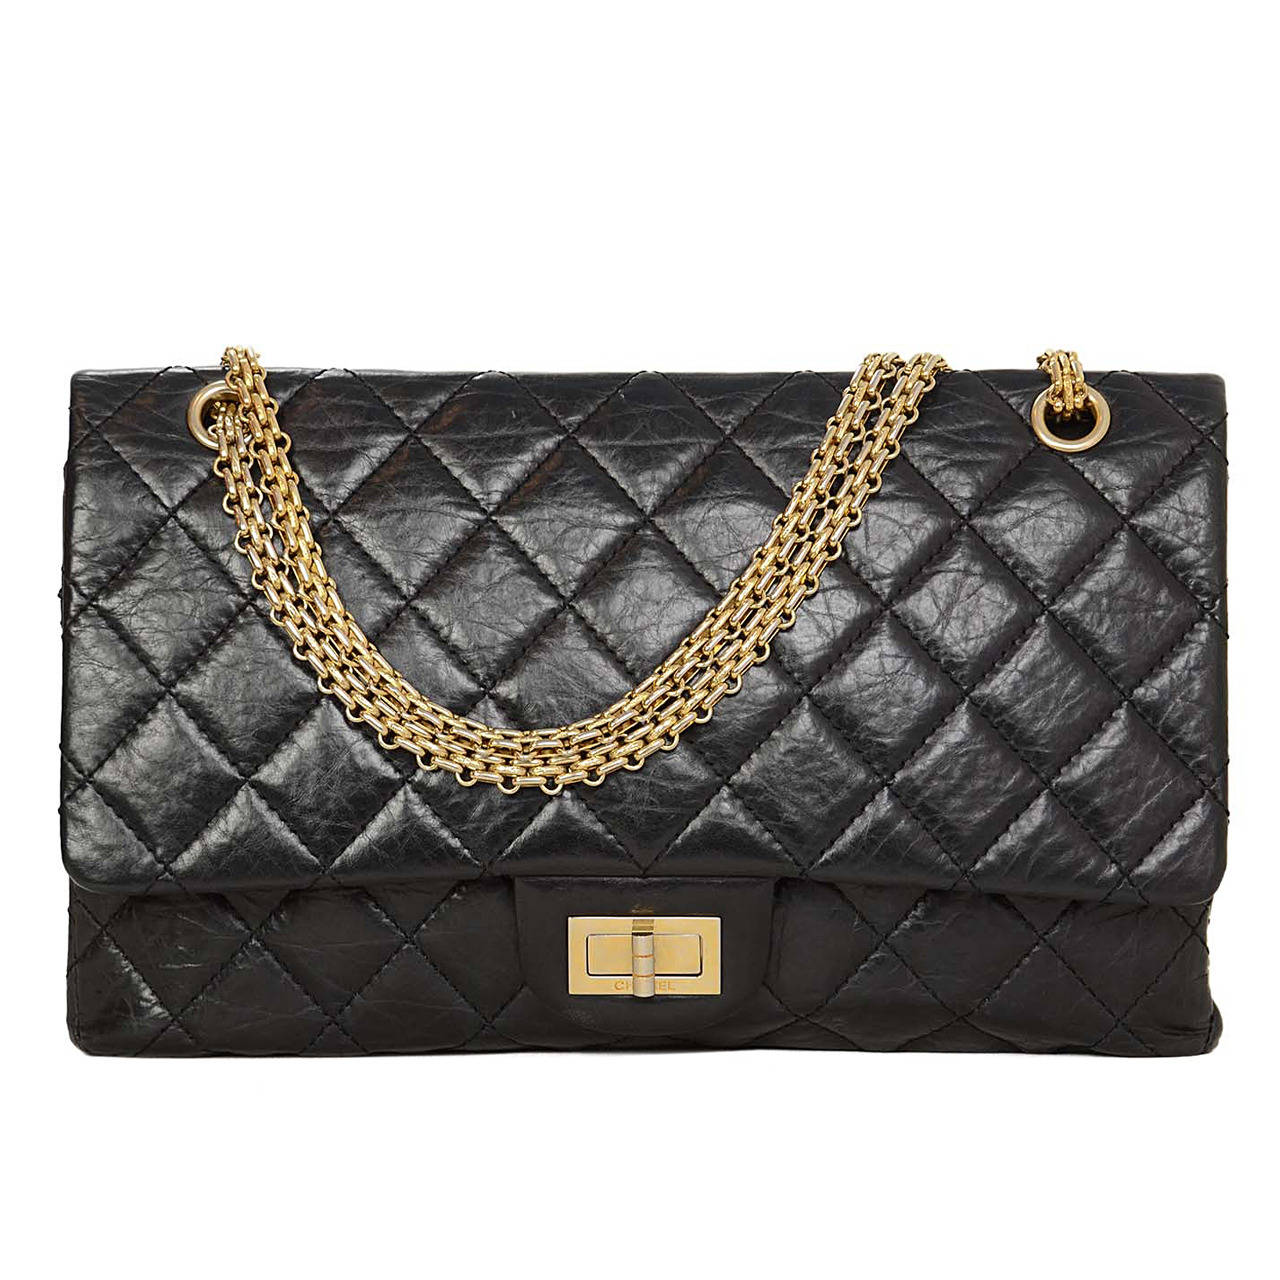 CHANEL 2005 Black Leather Re-Issue 227 Classic Double Flap Bag rt $6000 ...